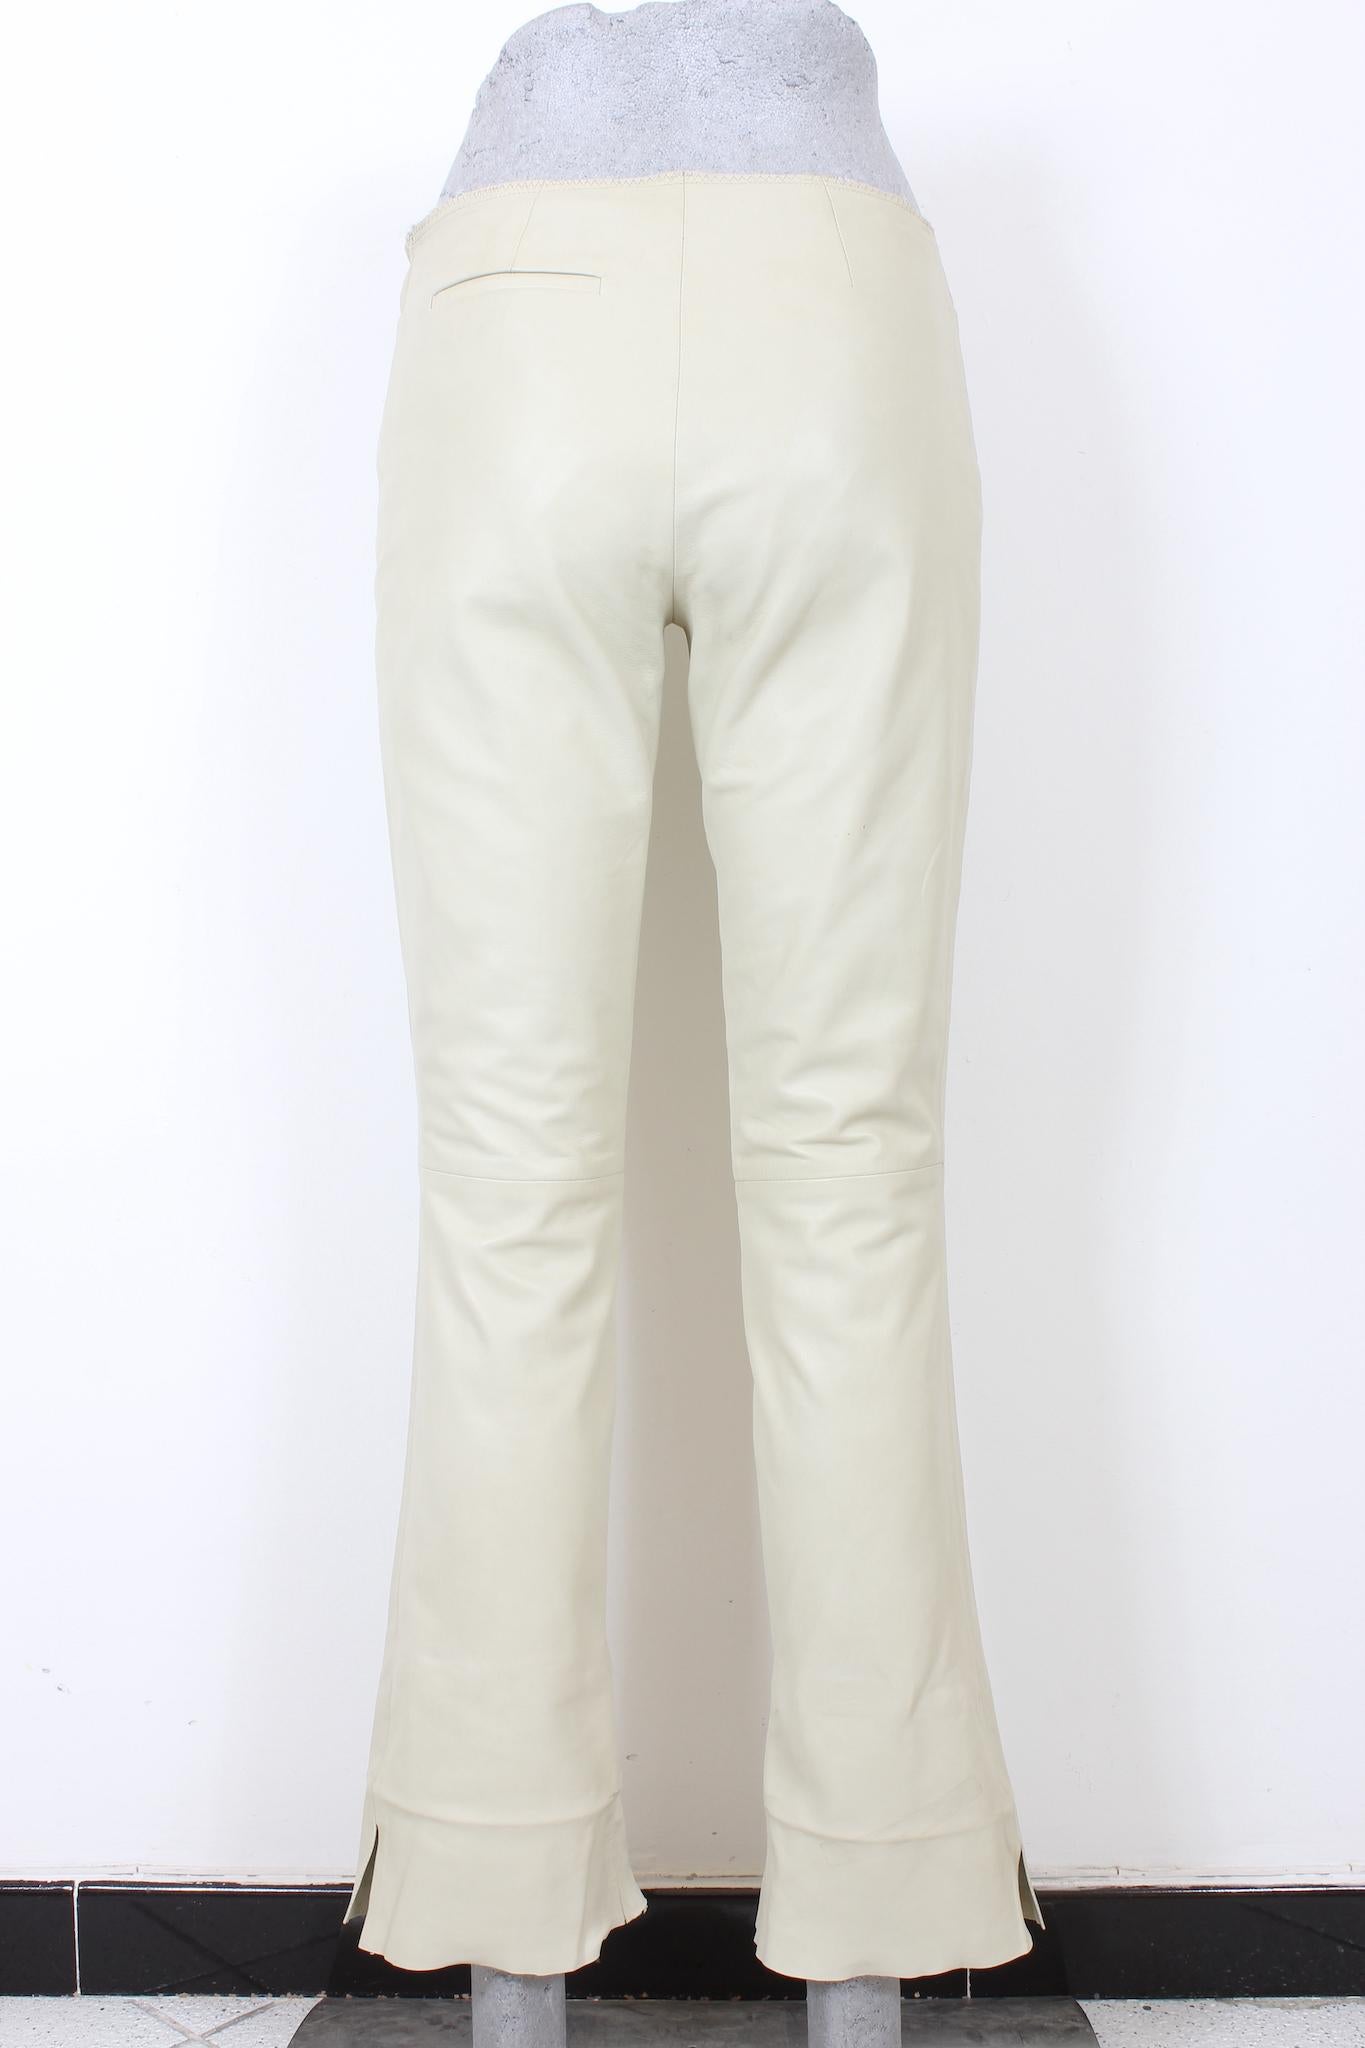 Gucci vintage 90s soft leather trousers. Beige flared trousers, 100% python leather. Low waist, zipper closure, side pockets. The finishes of the pant are raw cut. Internally lined. Made in italy.

Size: S

Waist: 36 cm
Length: 93 cm
Hem: 18